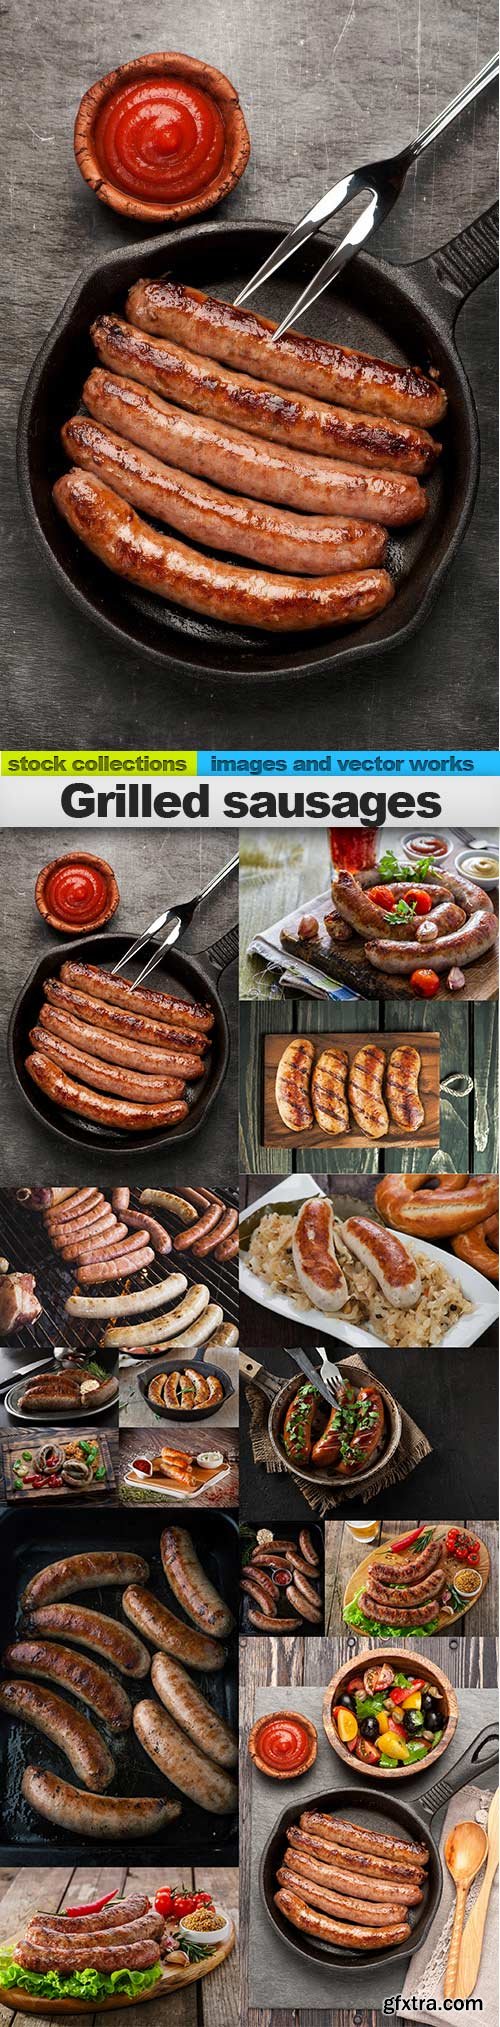 Grilled sausages, 15 x UHQ JPEG